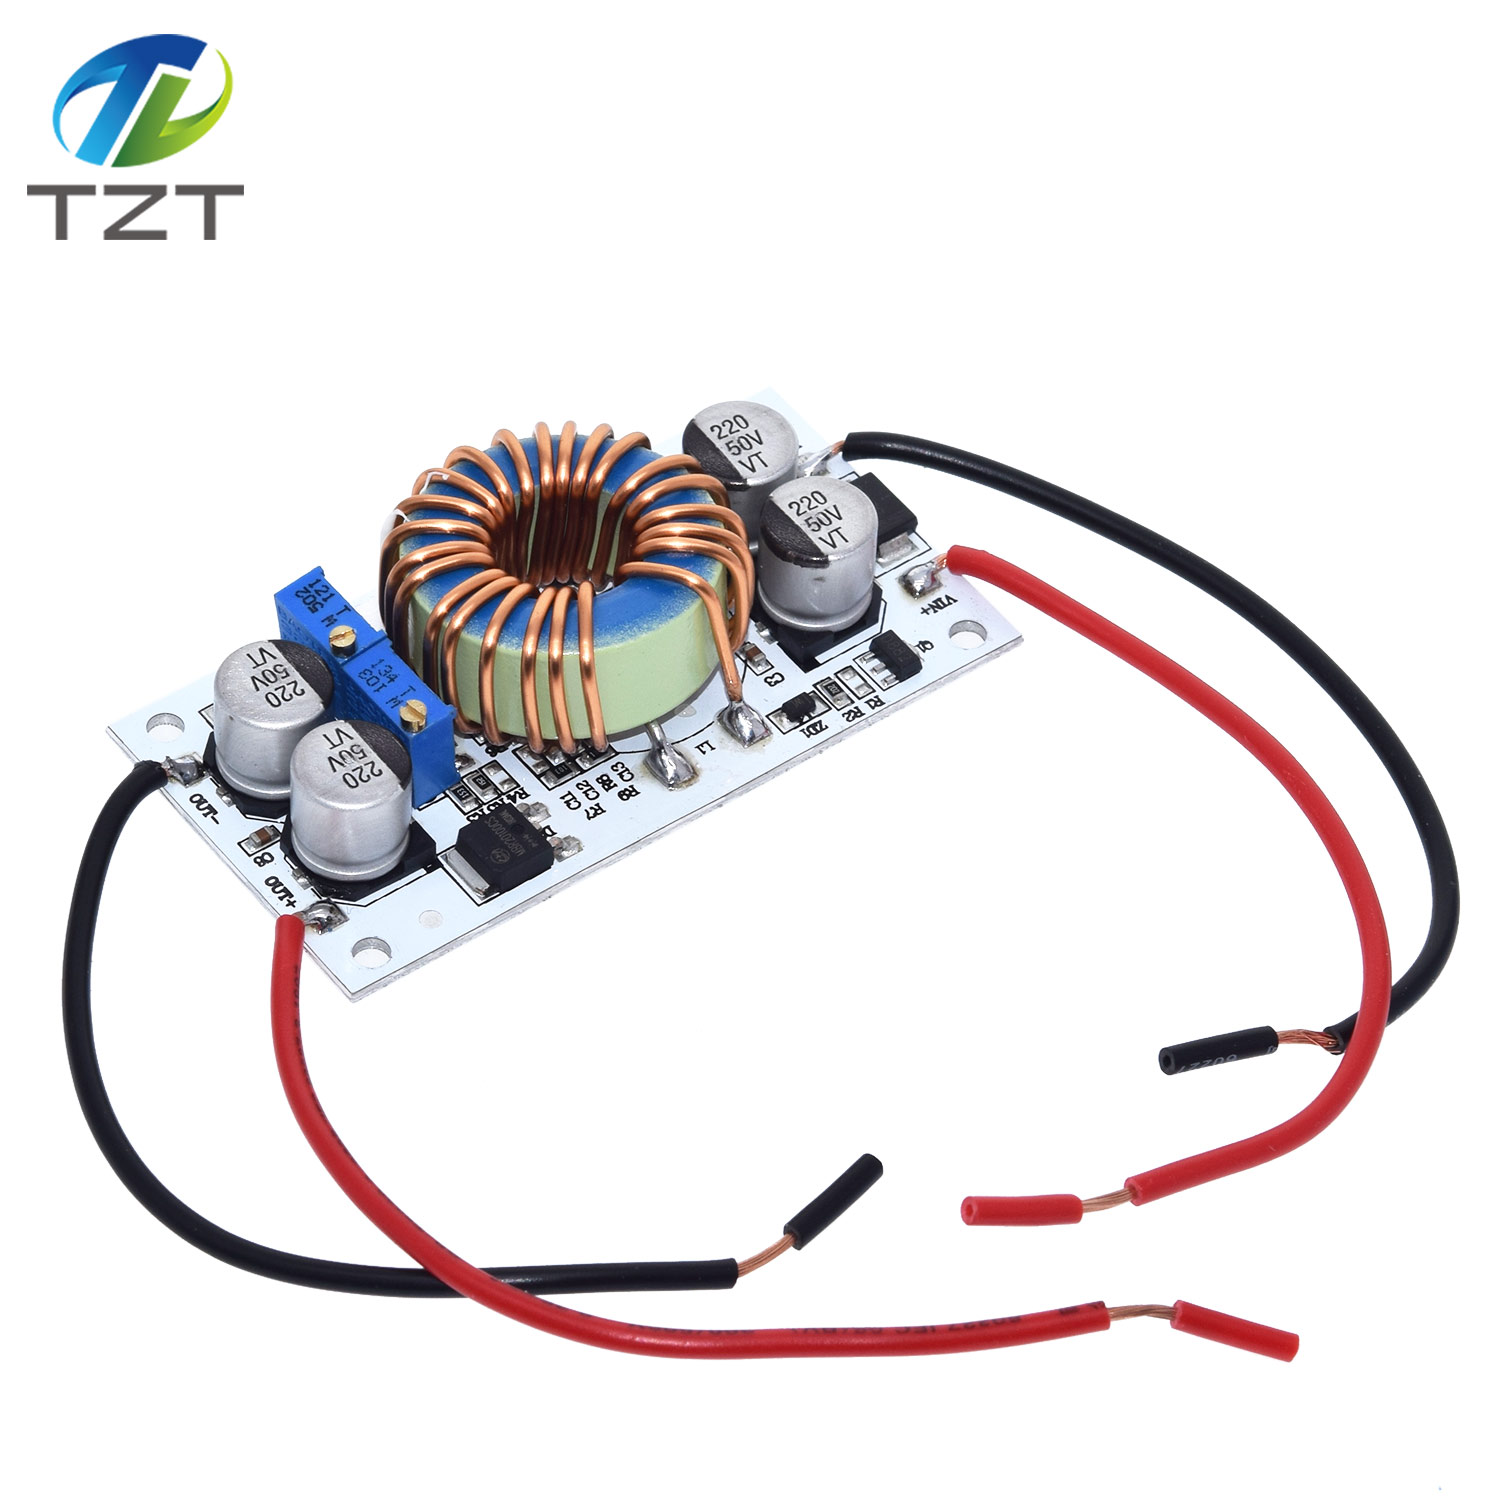 TZT DC-DC boost converter Constant Current Mobile Power supply 10A 250W LED Driver Step Up Module